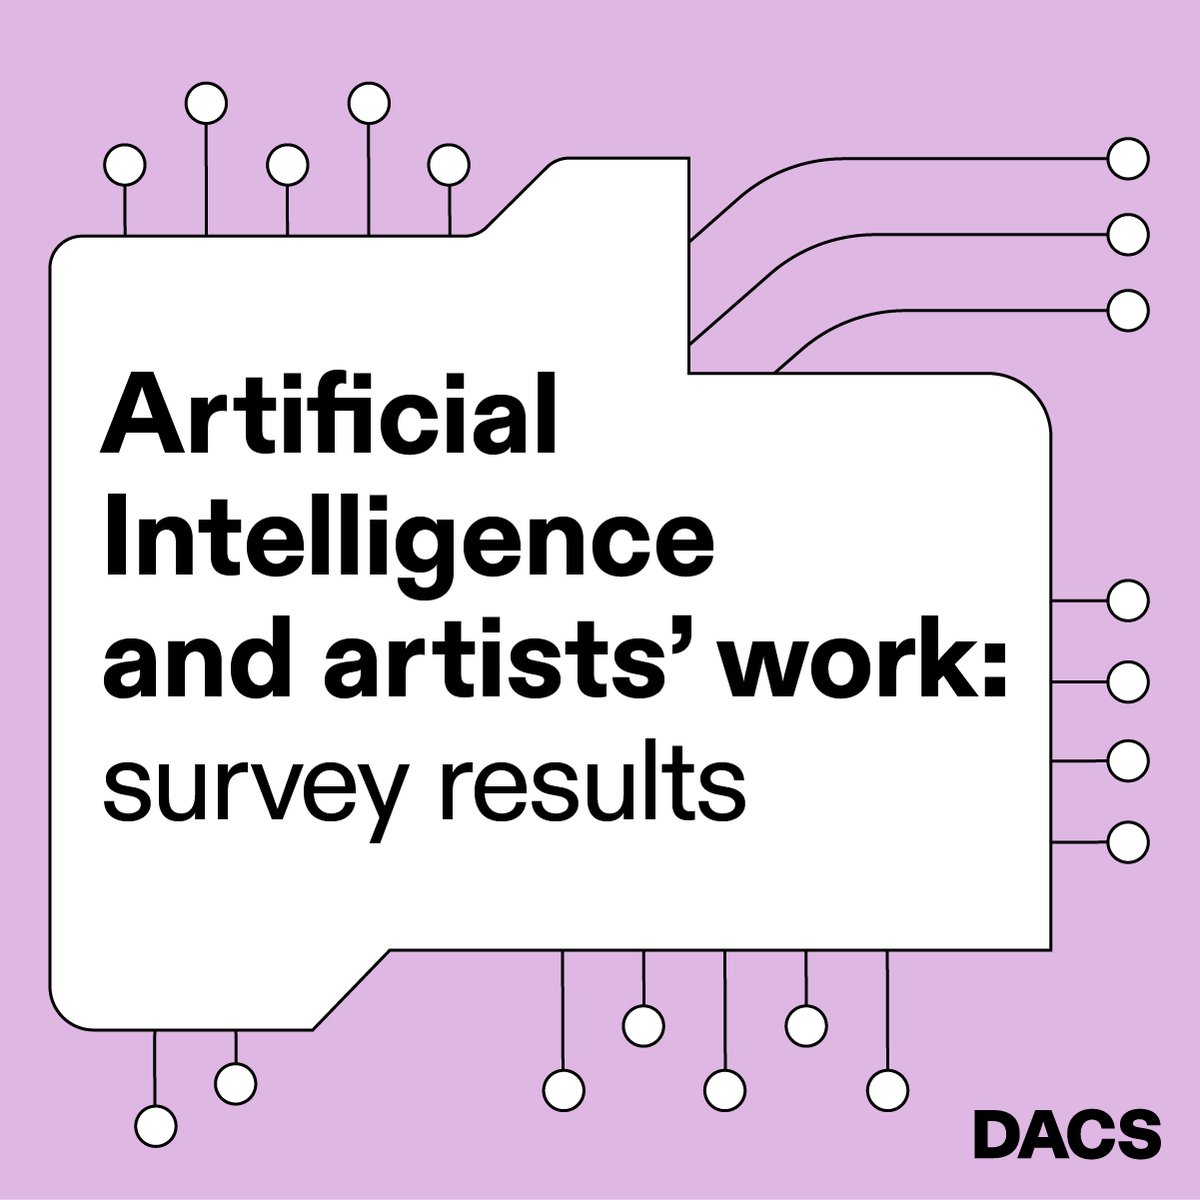 1/5 Today DACS publishes A.I. and Artists’ Work, showing the results of our AI survey and making 5 policy recommendations to help protect artists’ copyright and livelihoods. There is significant concern amongst respondents that unregulated AI could negatively impact their careers